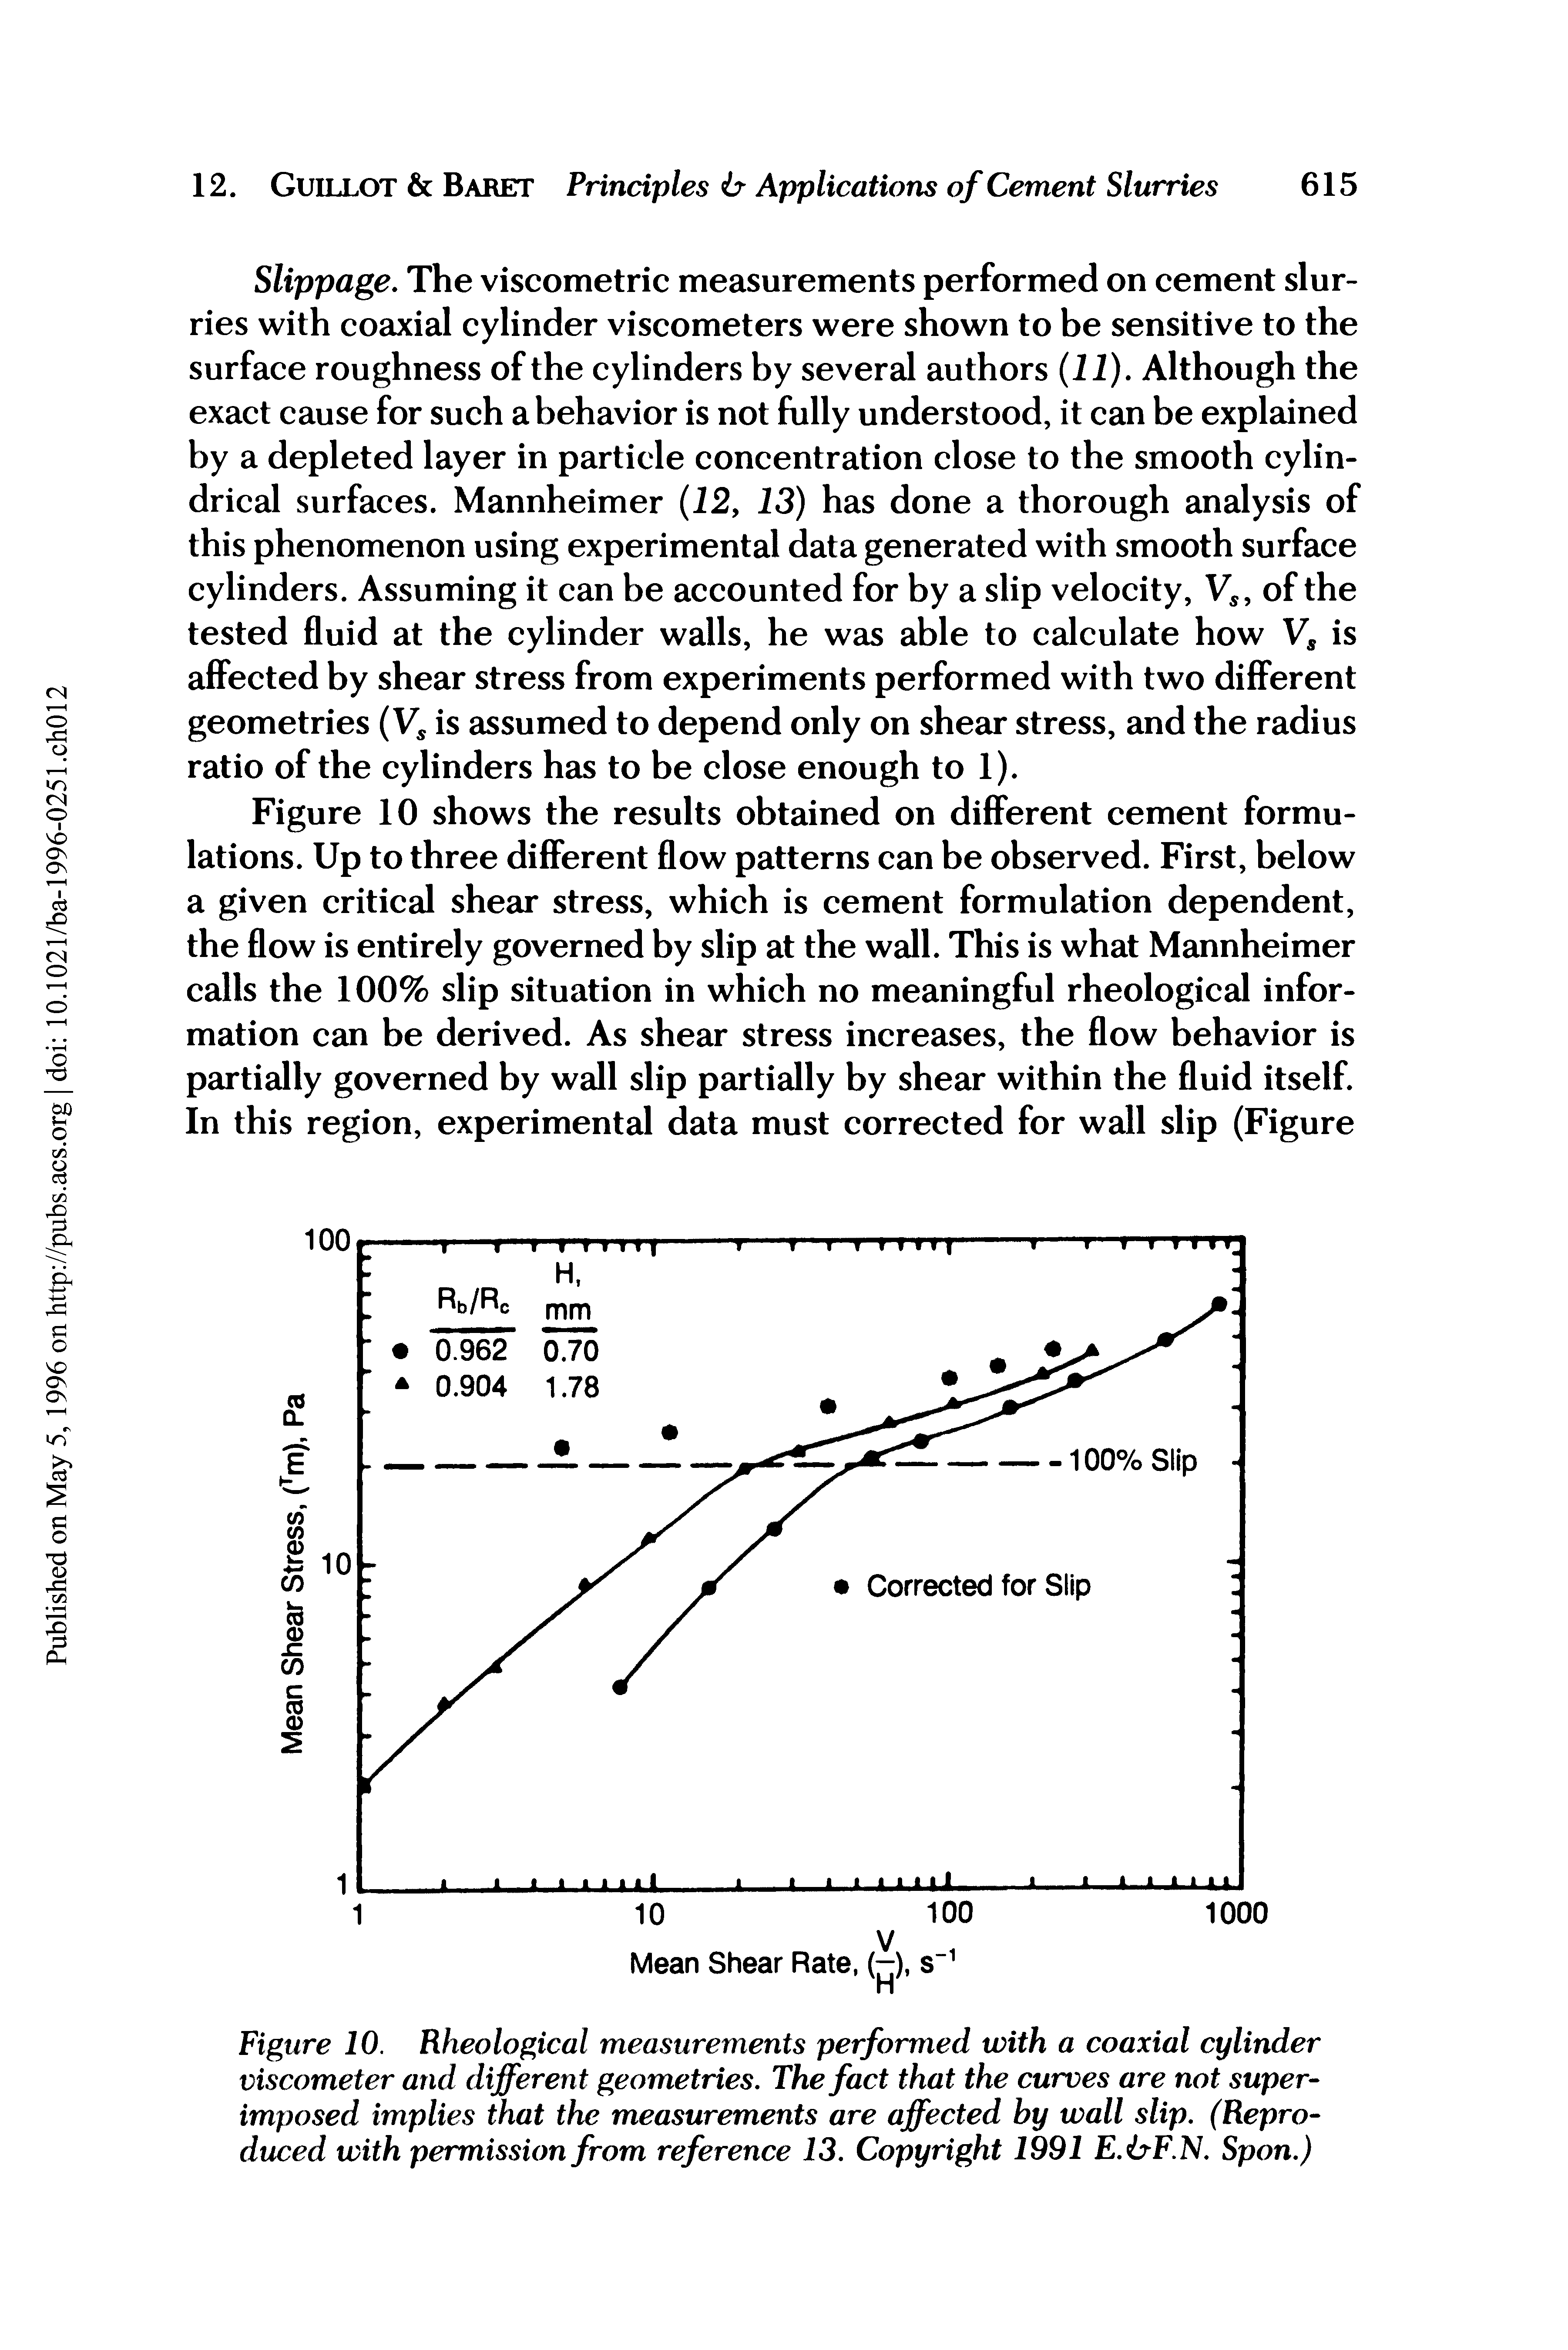 Figure 10. Rheological measurements performed with a coaxial cylinder viscometer and different geometries. The fact that the curves are not superimposed implies that the measurements are affected by wall slip. (Reproduced with permission from reference 13. Copyright 1991 E.irF.N. Spon.)...